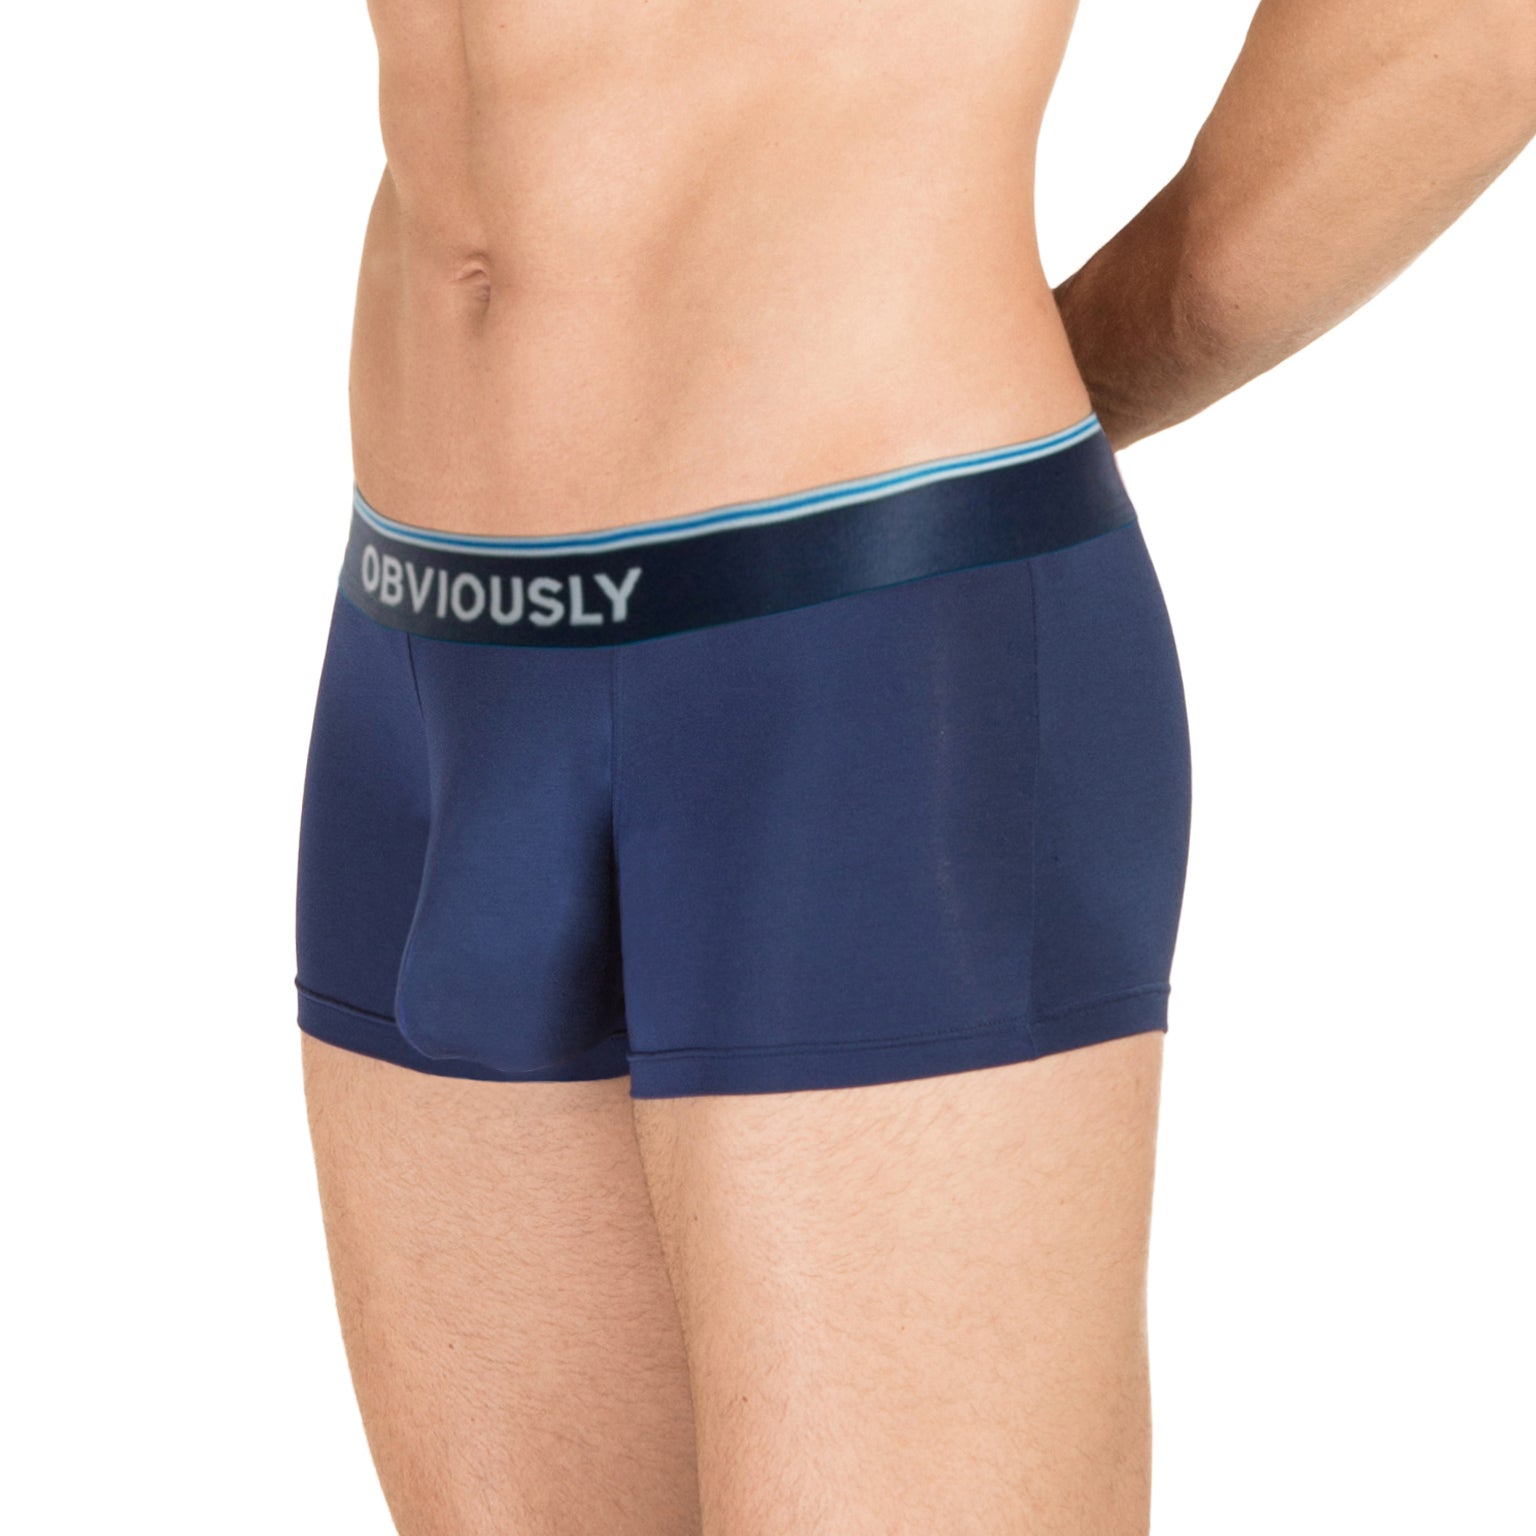 Obviously wants you to AnatoMAX™ your underwear! – Underwear News